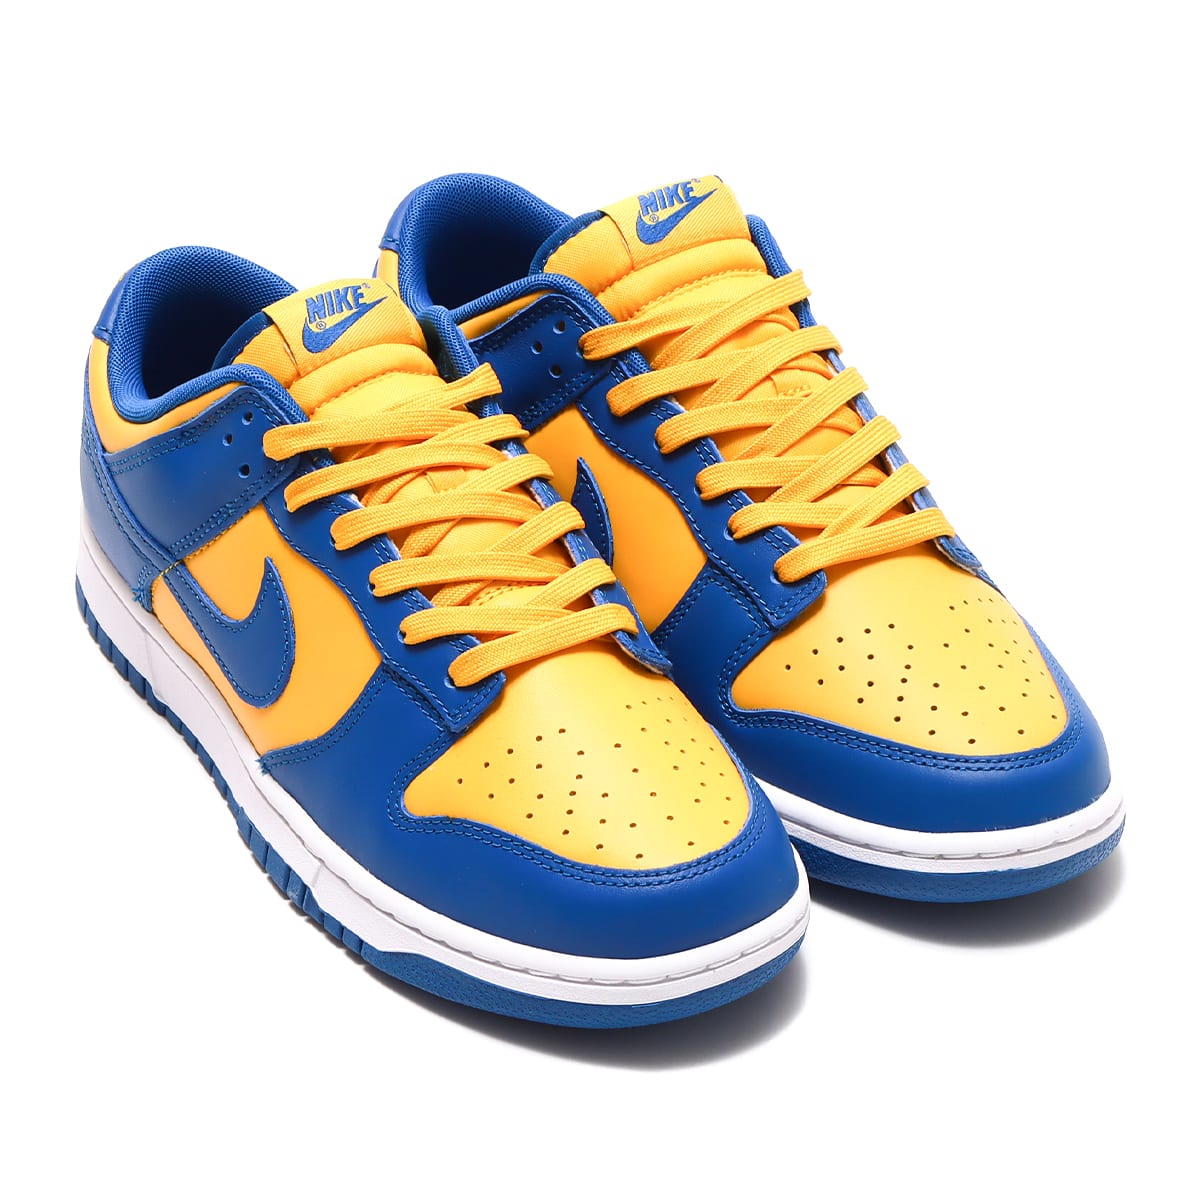 Nike Dunk Low Blue Jay and University